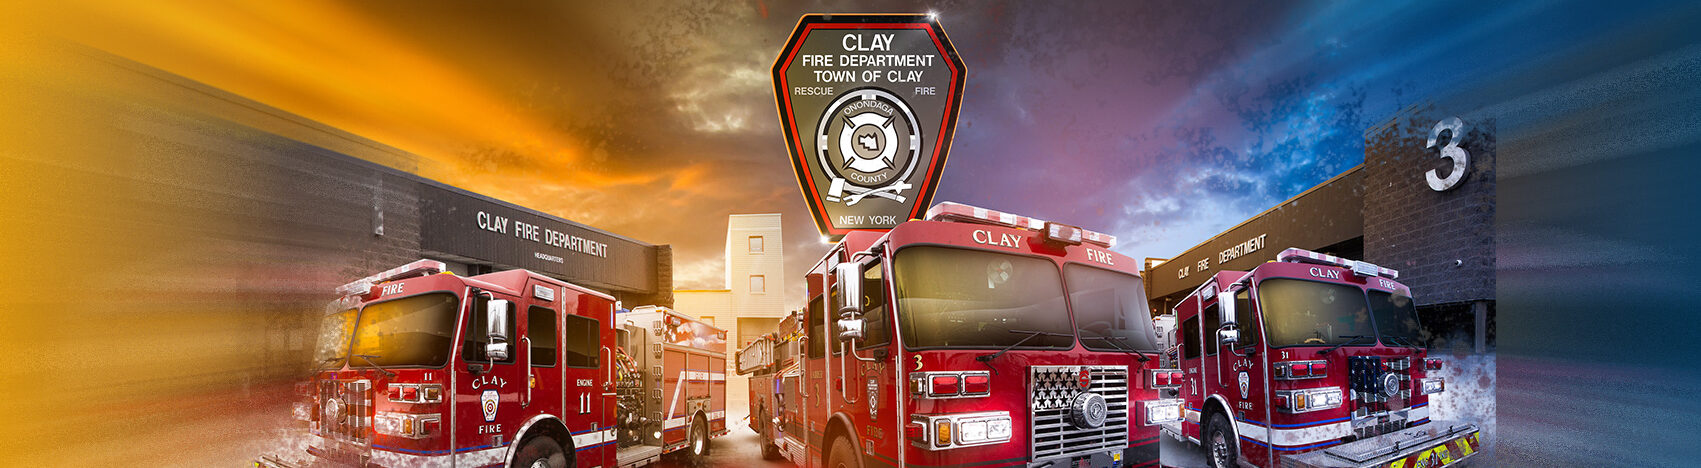 CLAY FIRE DEPARTMENT